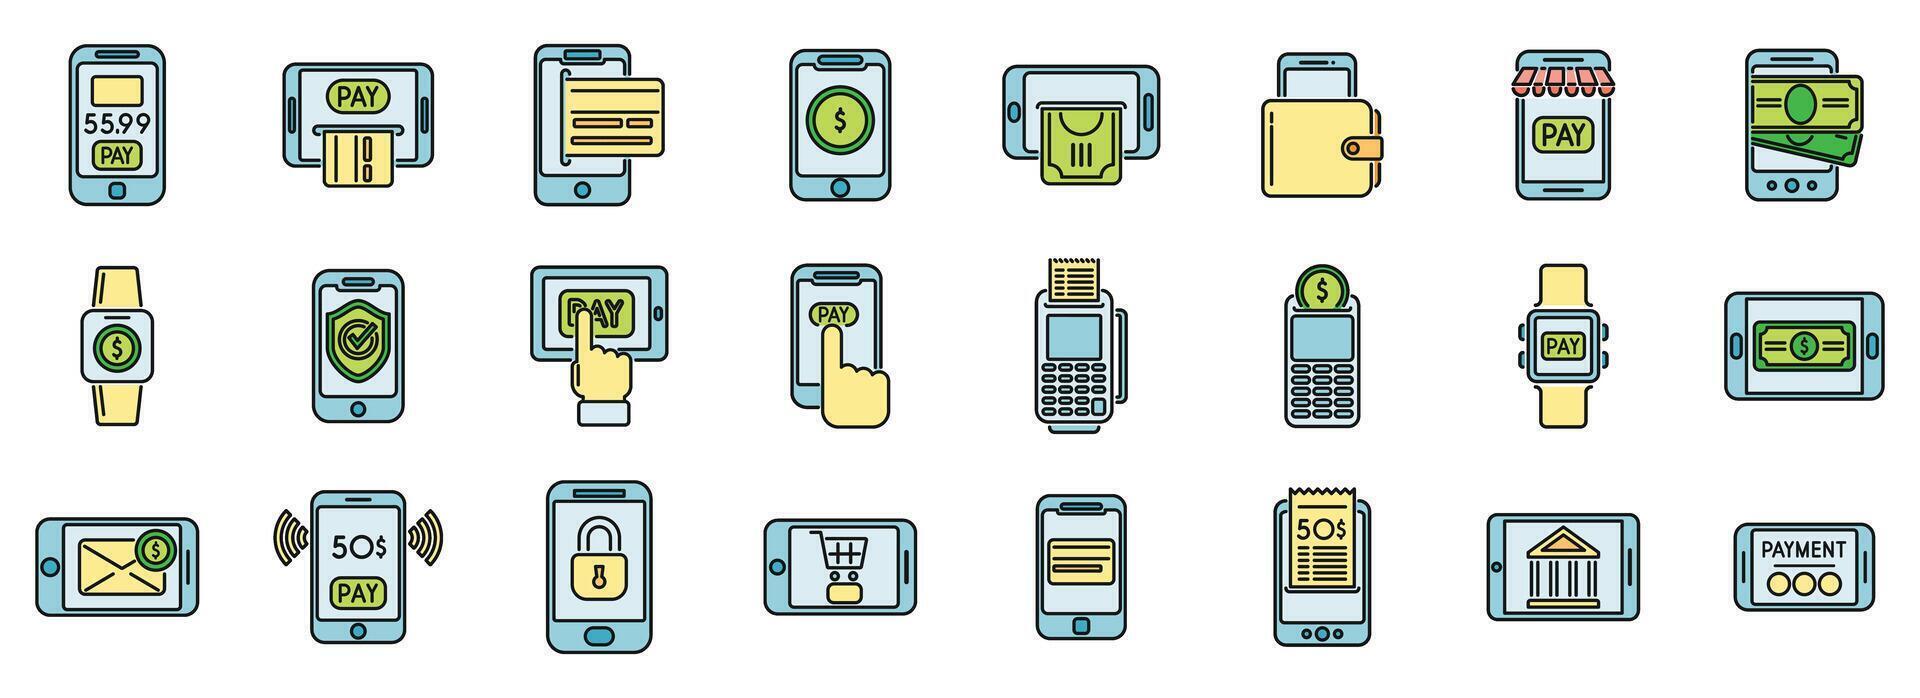 Mobile payment icons set vector color